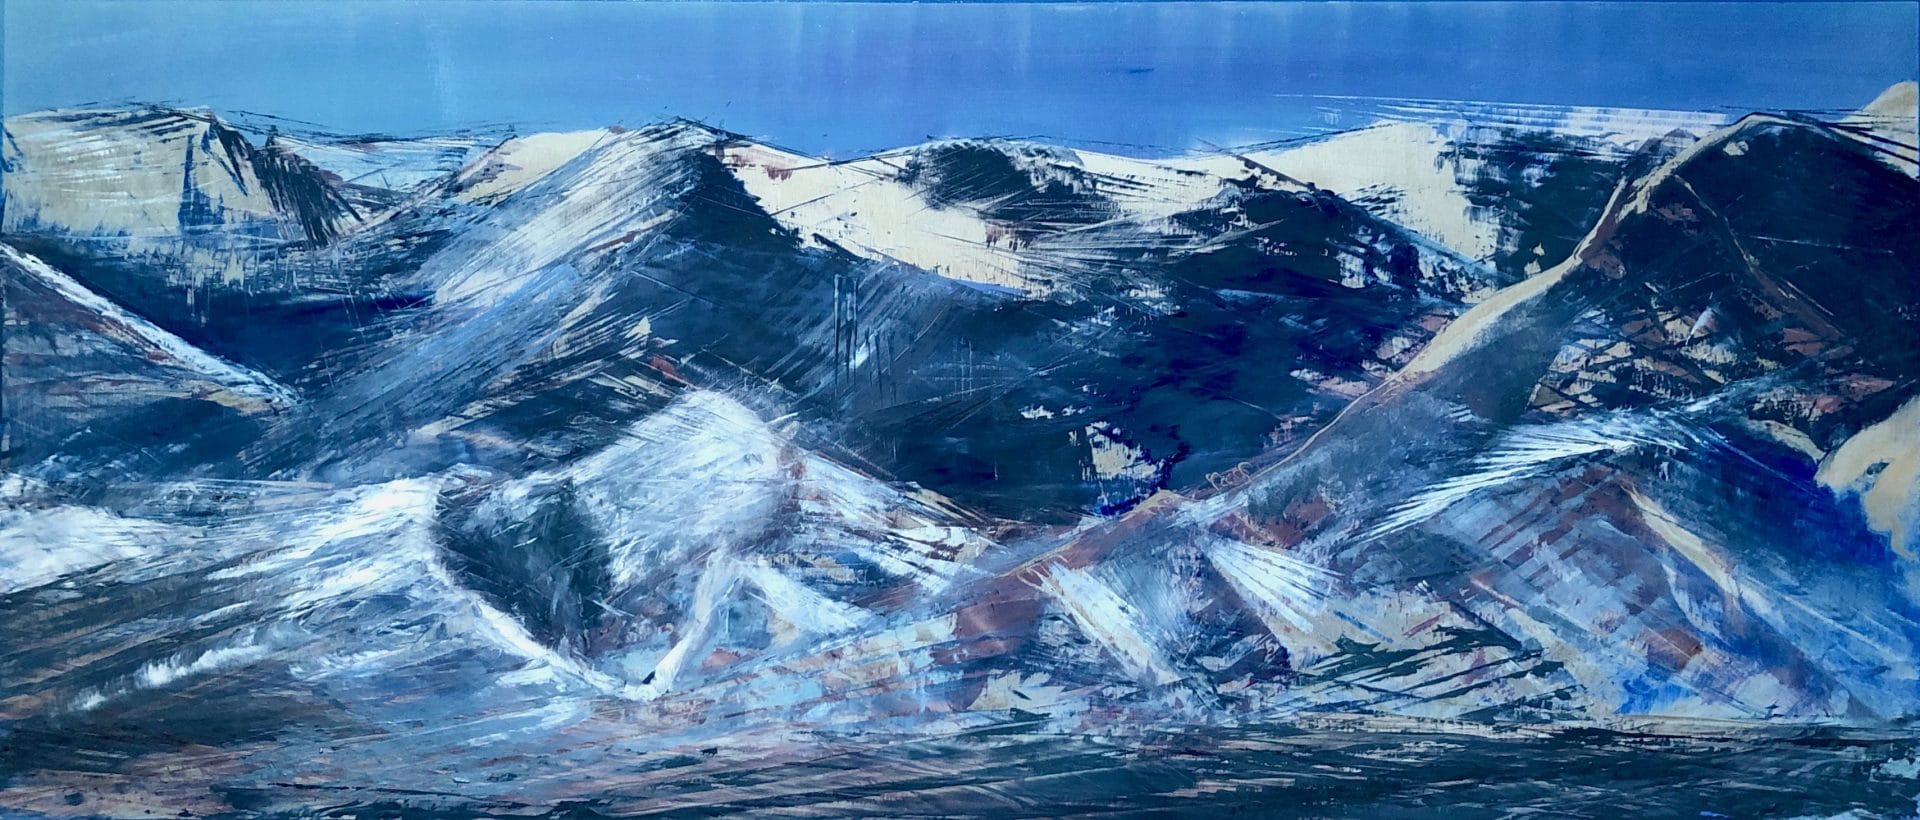 Blue and silver mountain scape of the Wasatch Mountains in Park City, Utah.